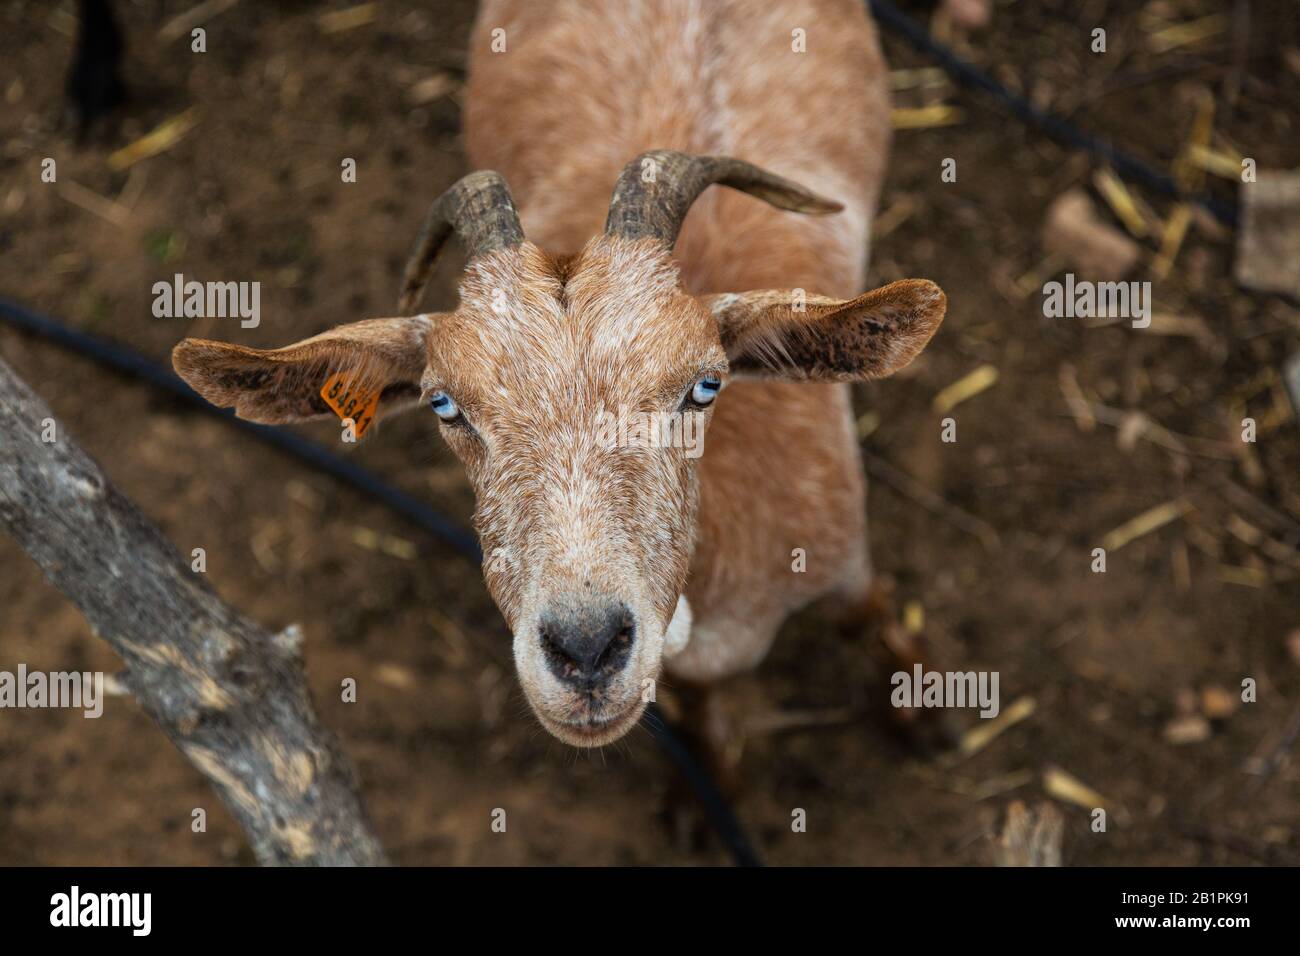 An inquisitive goat in Andalusia, Spain Stock Photo